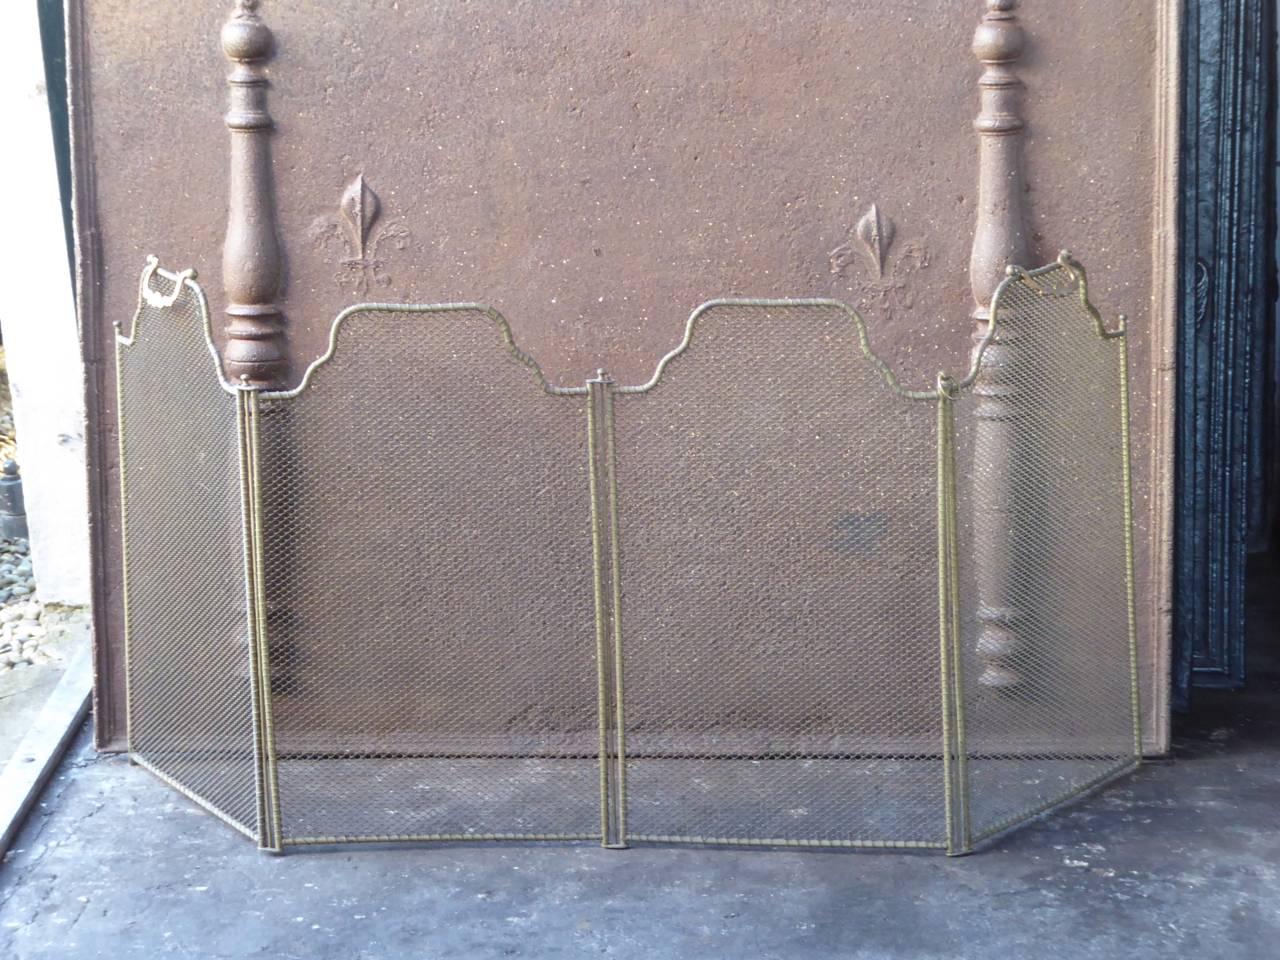 19th century French fireplace screen made of brass, iron mesh and iron.

We have a unique and specialized collection of antique and used fireplace accessories consisting of more than 1000 listings at 1stdibs. Amongst others, we always have 300+